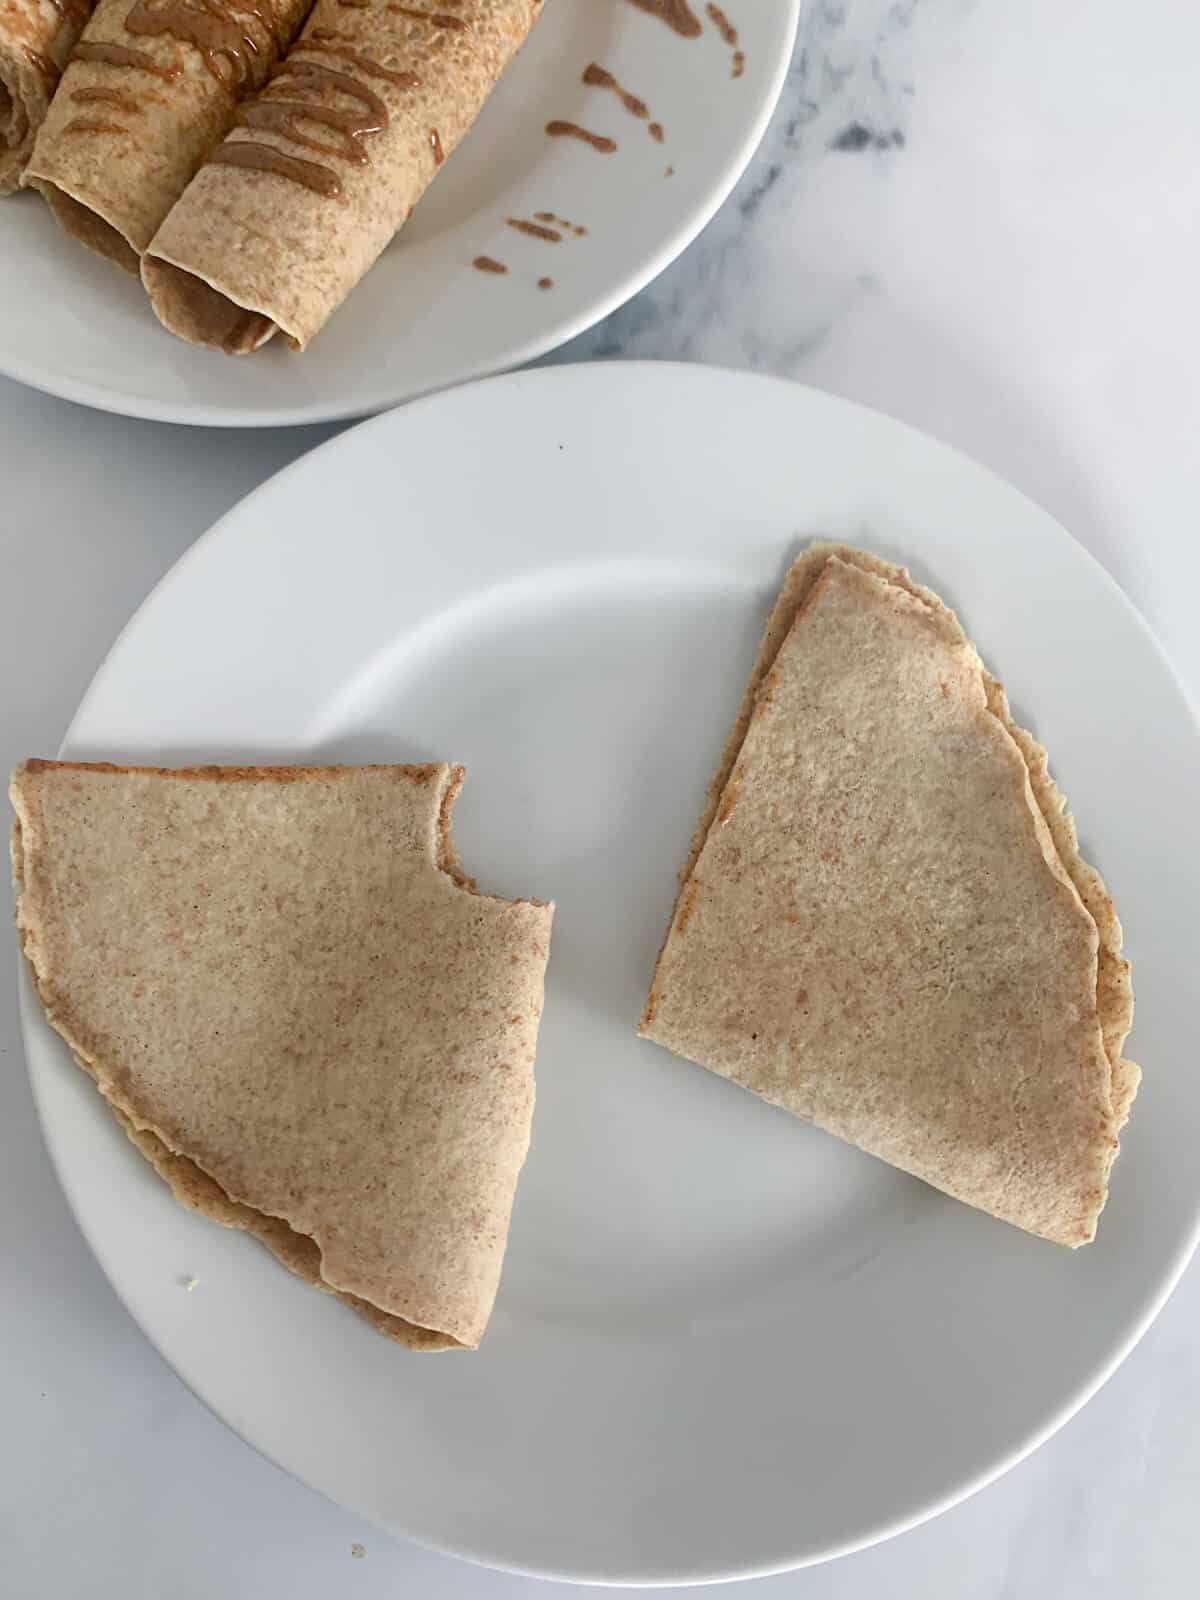 1 wholewheat dairy-free pancake folded and cut into triangles for toddler 